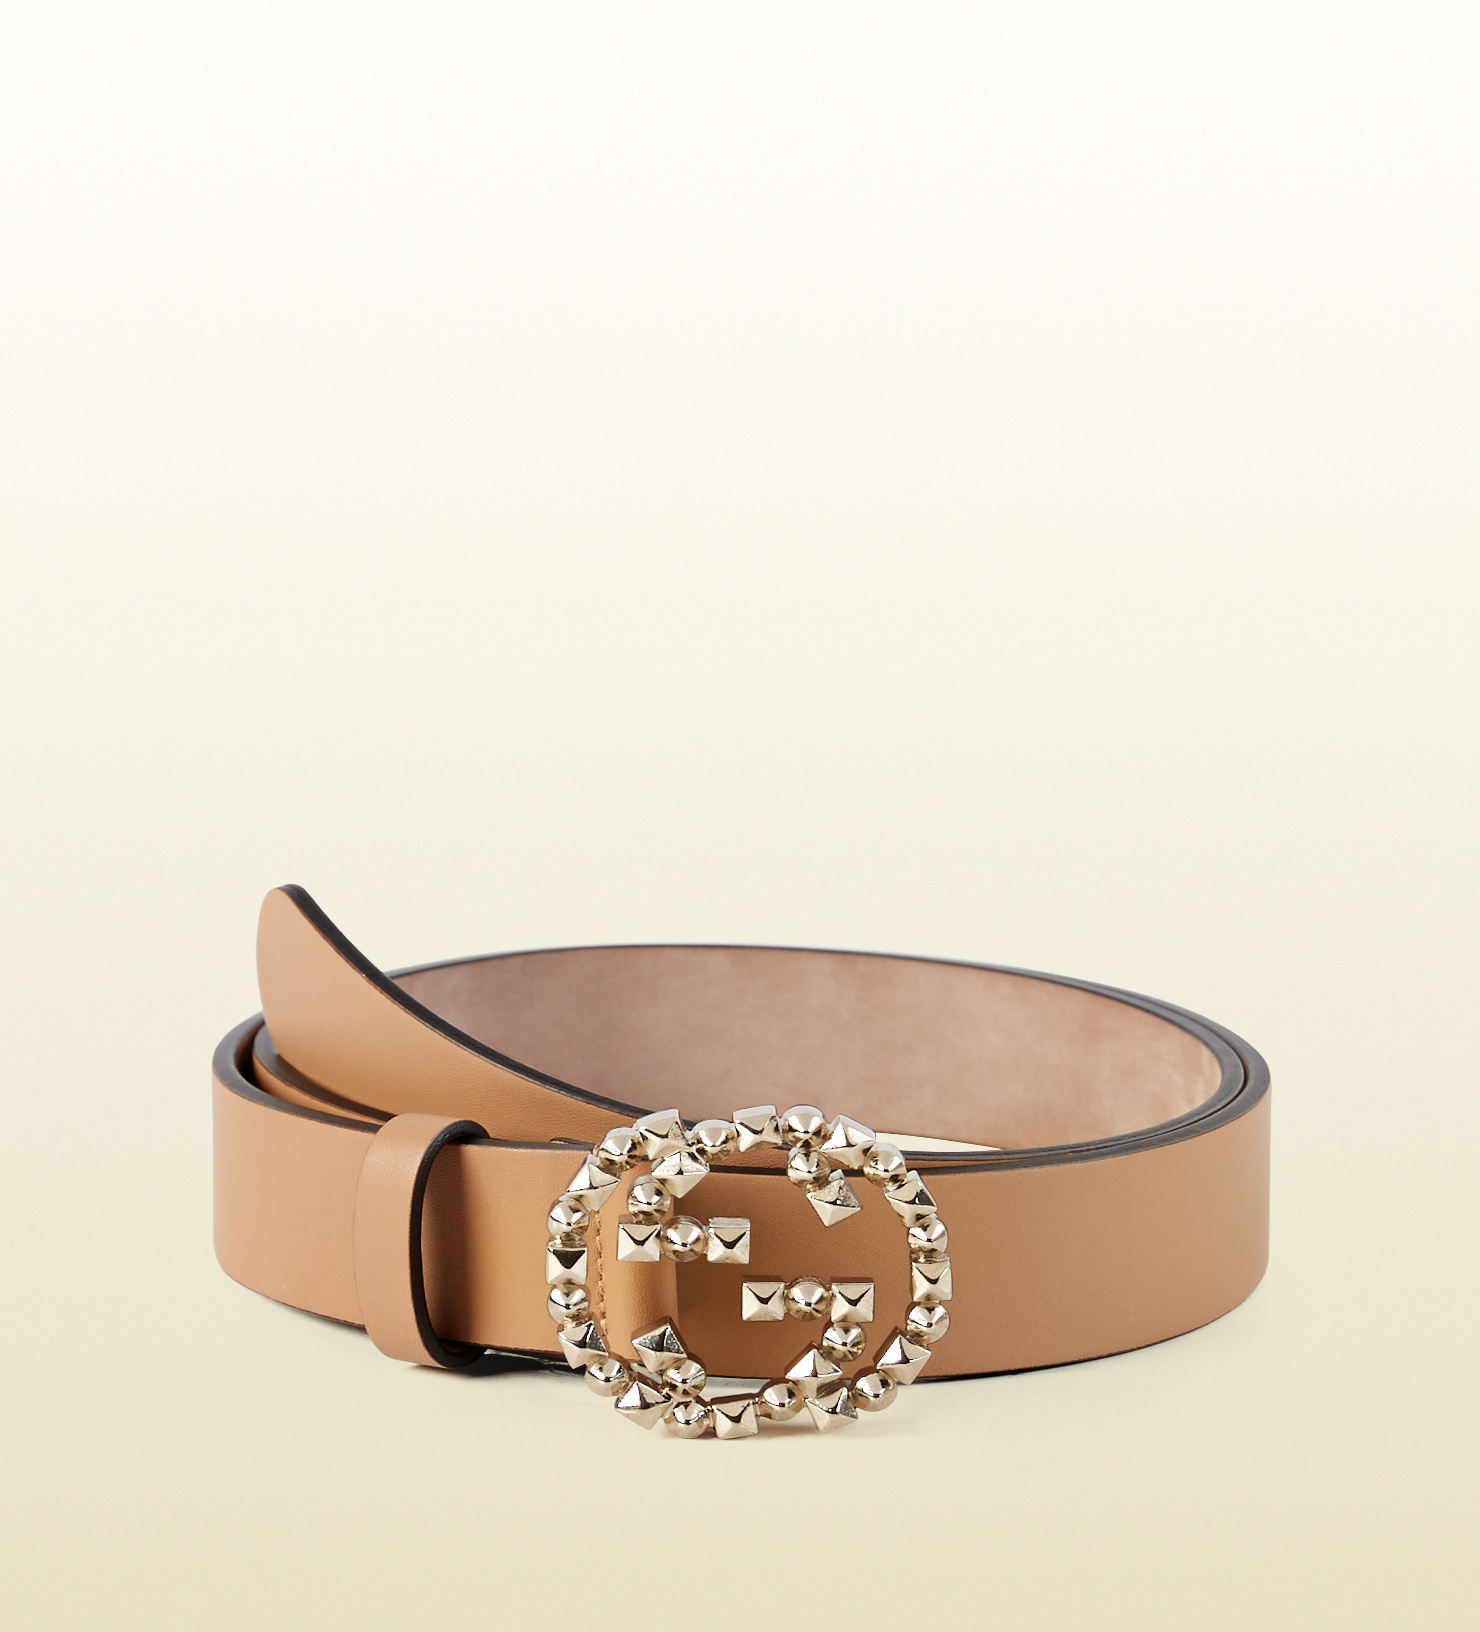 Lyst - Gucci Leather Belt With Studded Interlocking G Buckle in Brown